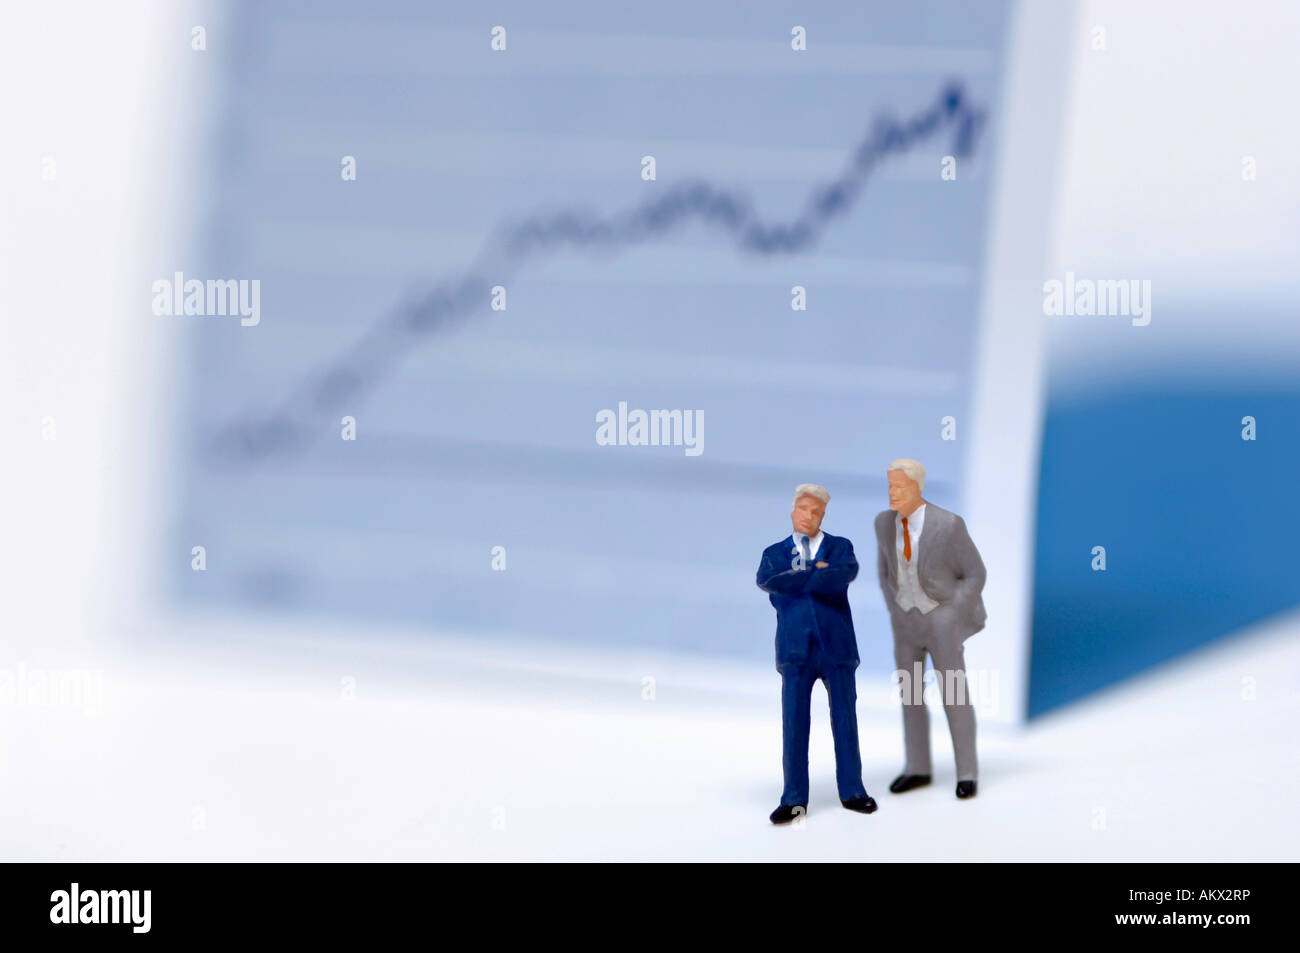 Figurines of businessmen in front of graph Stock Photo